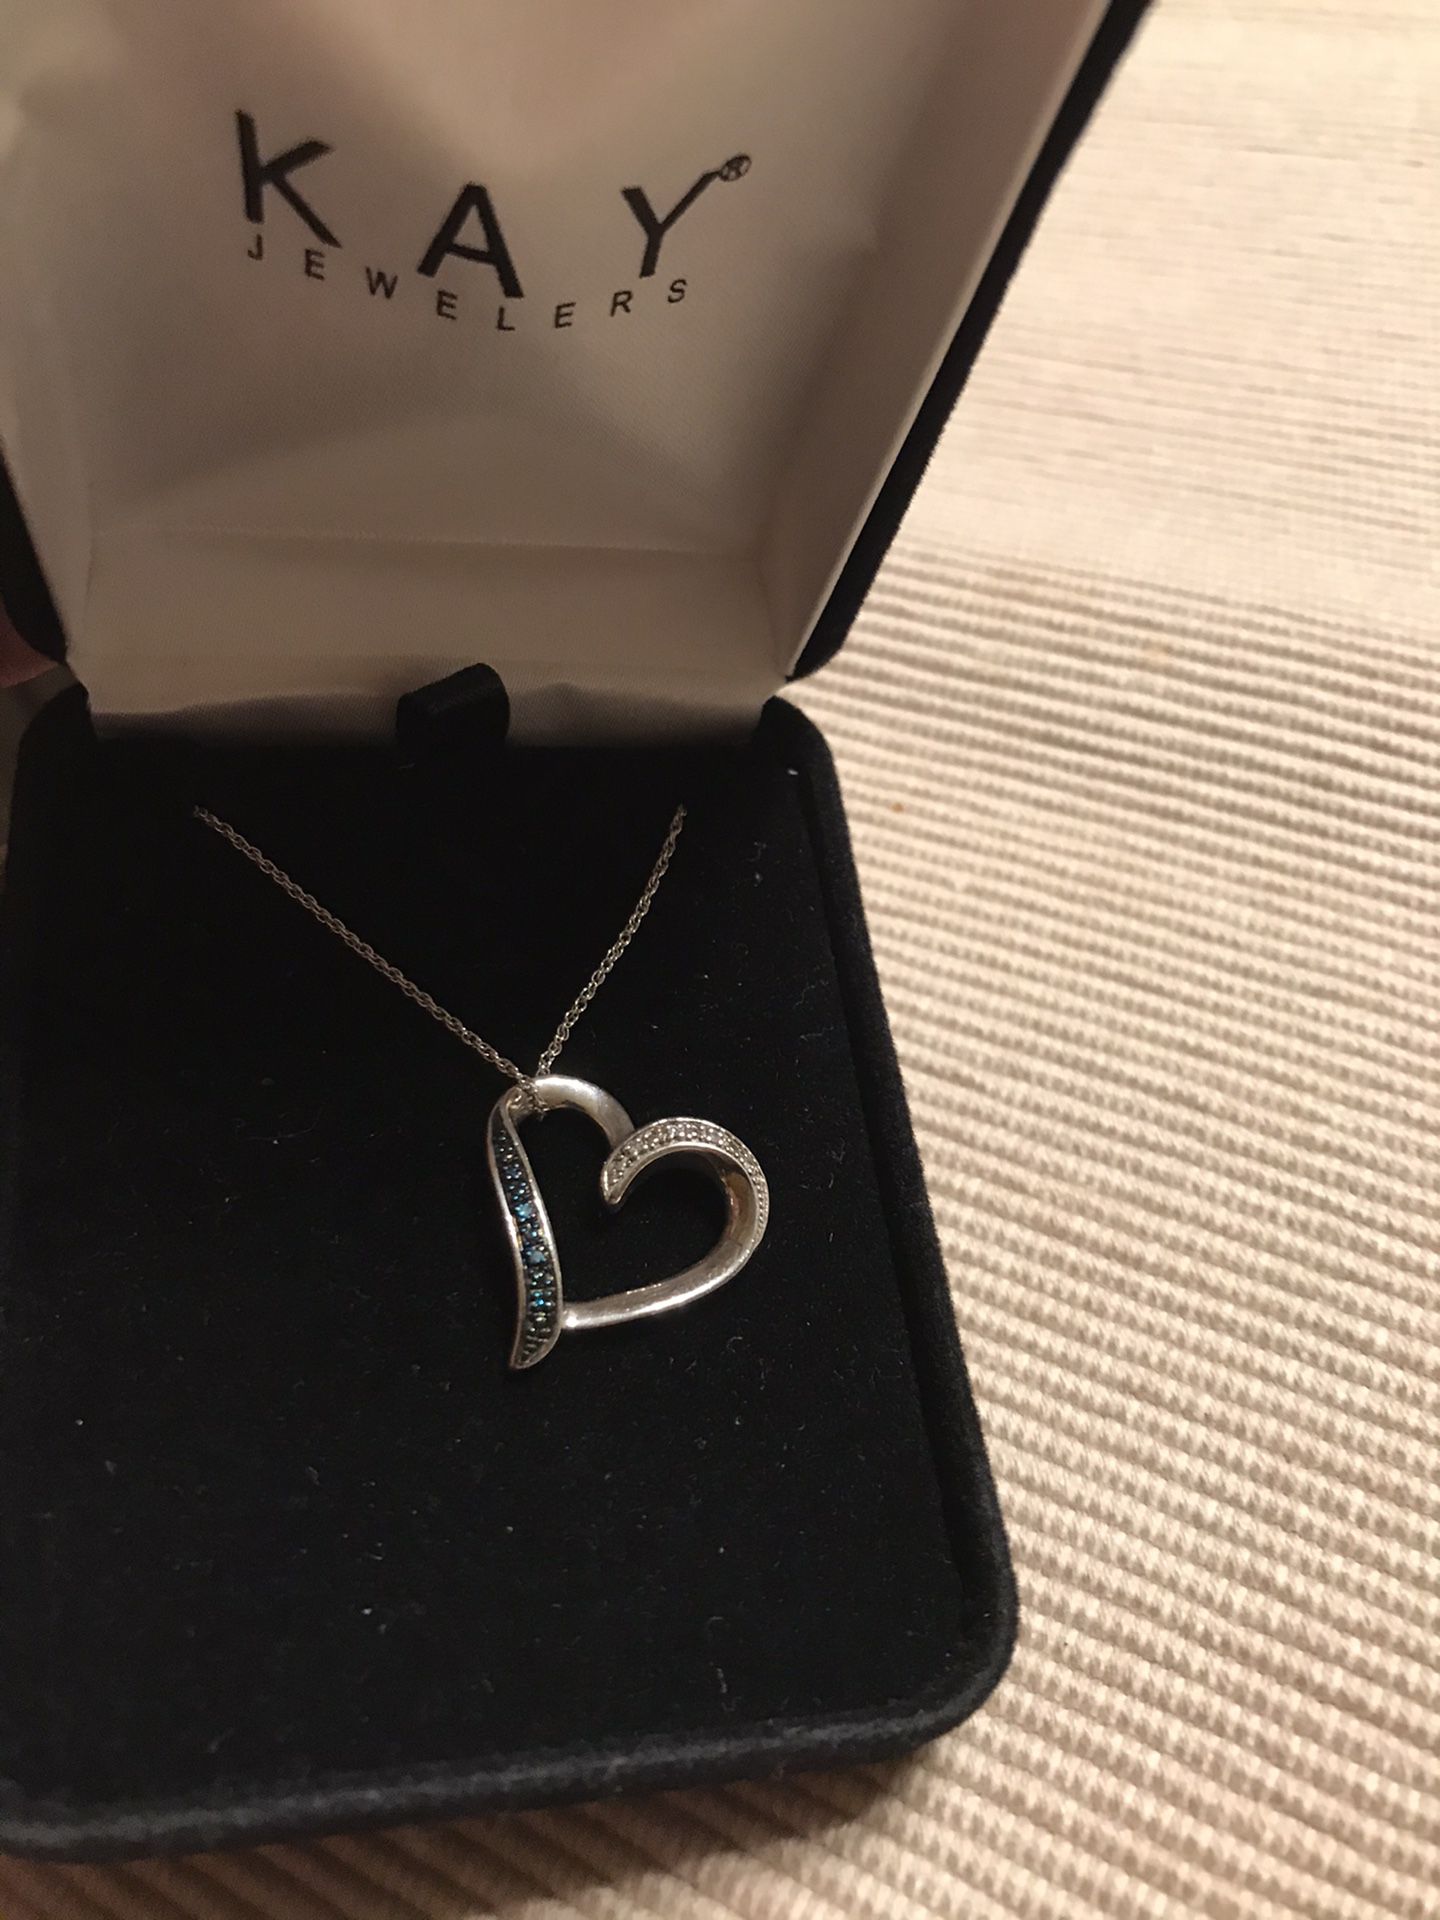 Kay Jewelers Heart Necklace Black and White Diamonds Sterling Silver